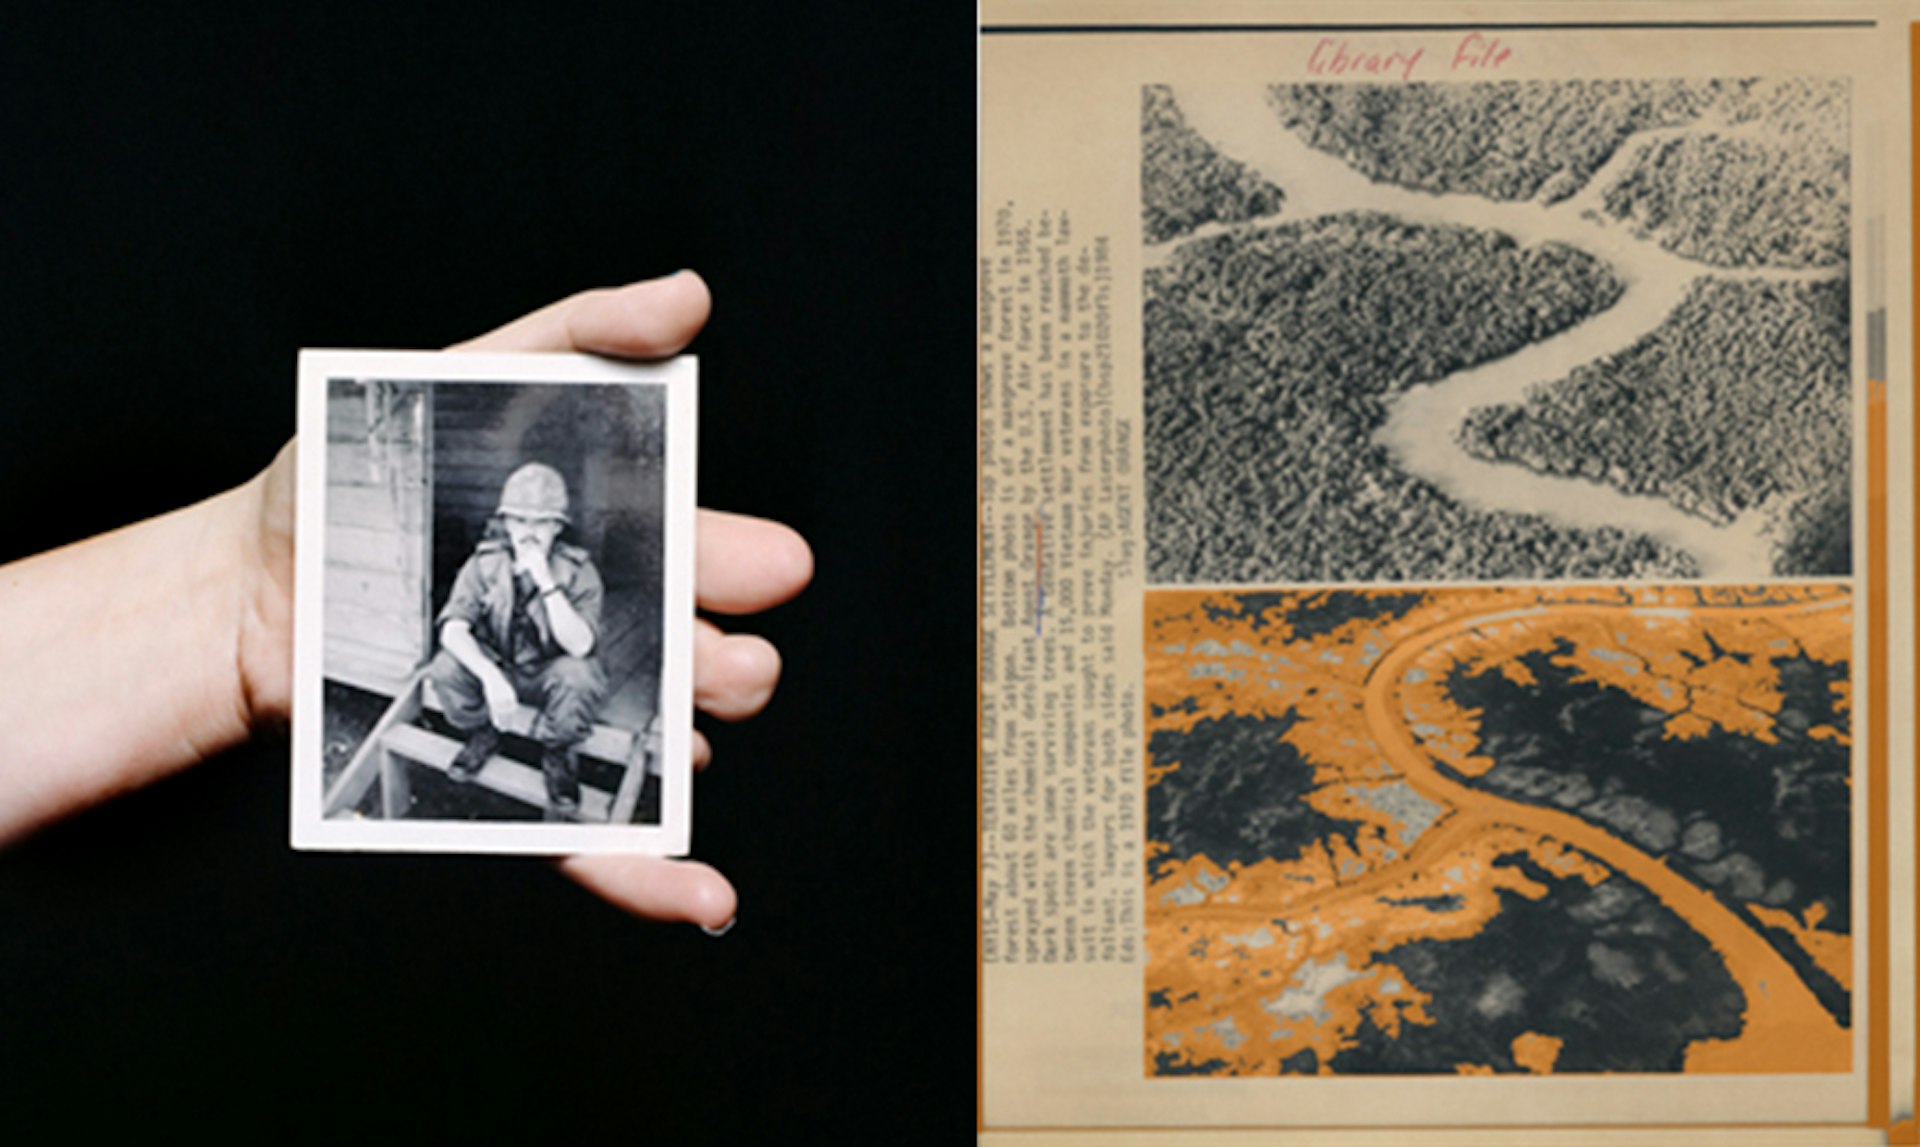 Left: Heather Bowser holds a photograph of her father, Morris, who served in Vietnam areas sprayed with Agent Orange. Photo by Mathieu Asselin. Right: Archival material. © US Herbicide Assessment Commission. Photographic intervention by Mathieu Asselin.